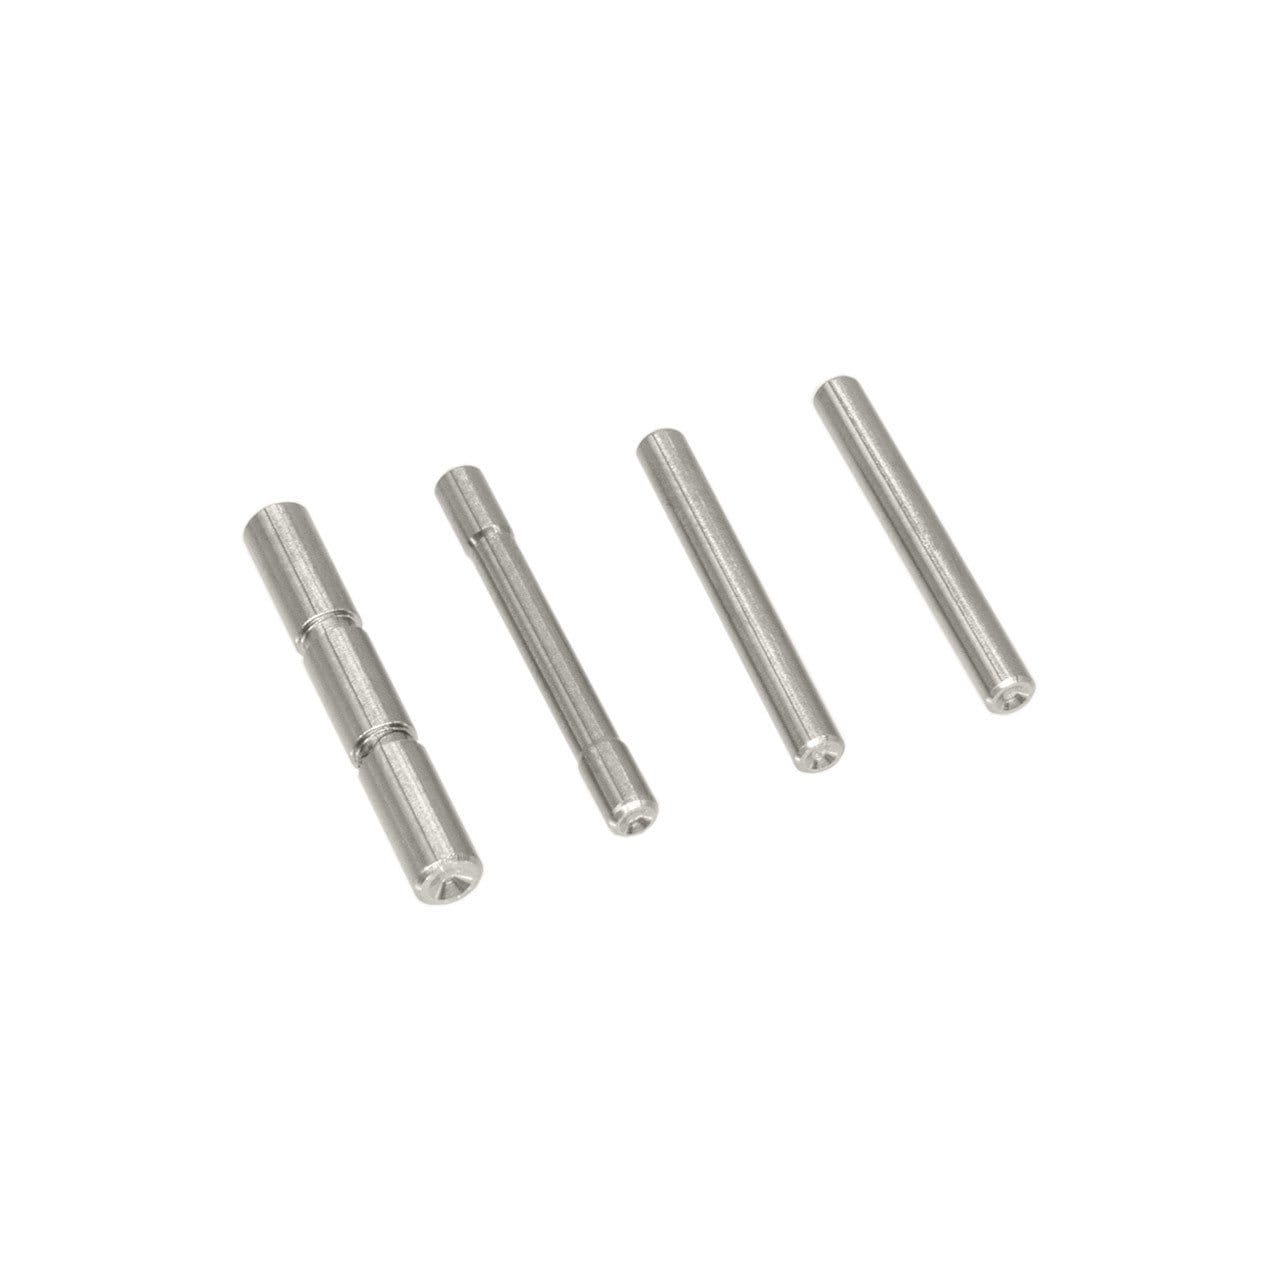 Image of ROOK Tactical Polymer 80 Gen 2.0 Dimpled Pin Kit (PF940C/V2/CL) - Stainless Steel